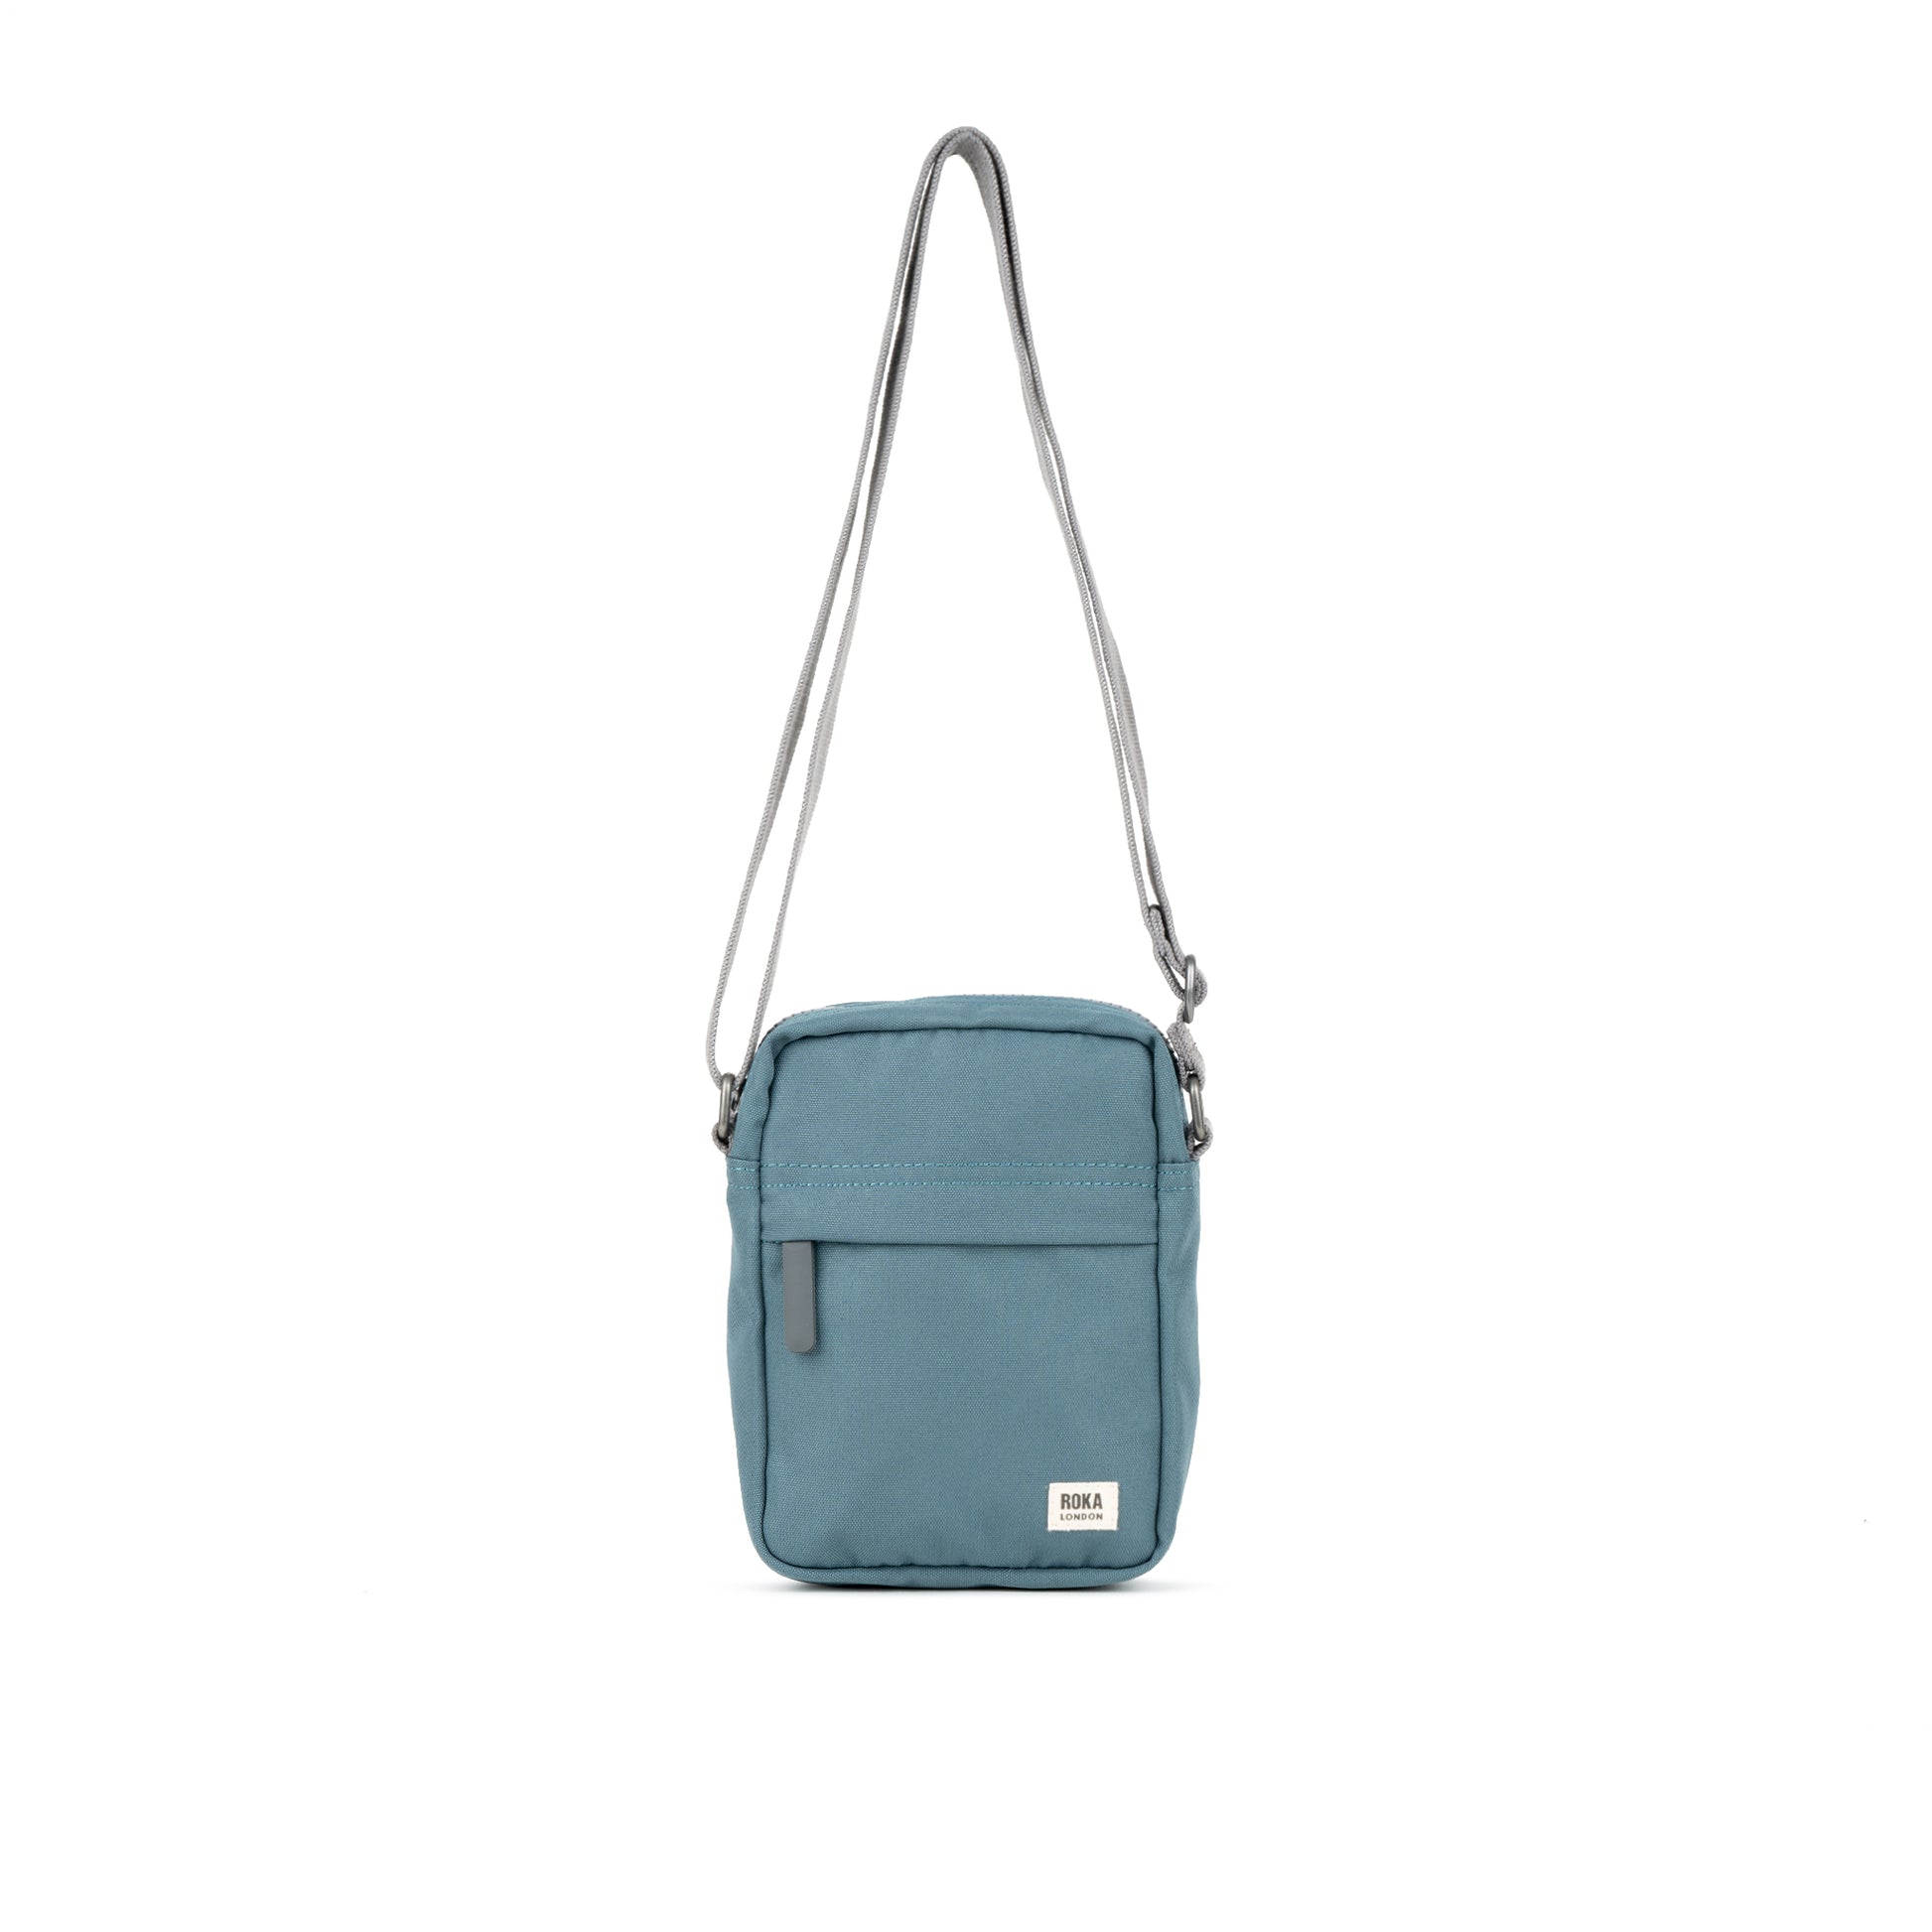 Conker Boutique Roka Bond Sustainable Bag in Airforce